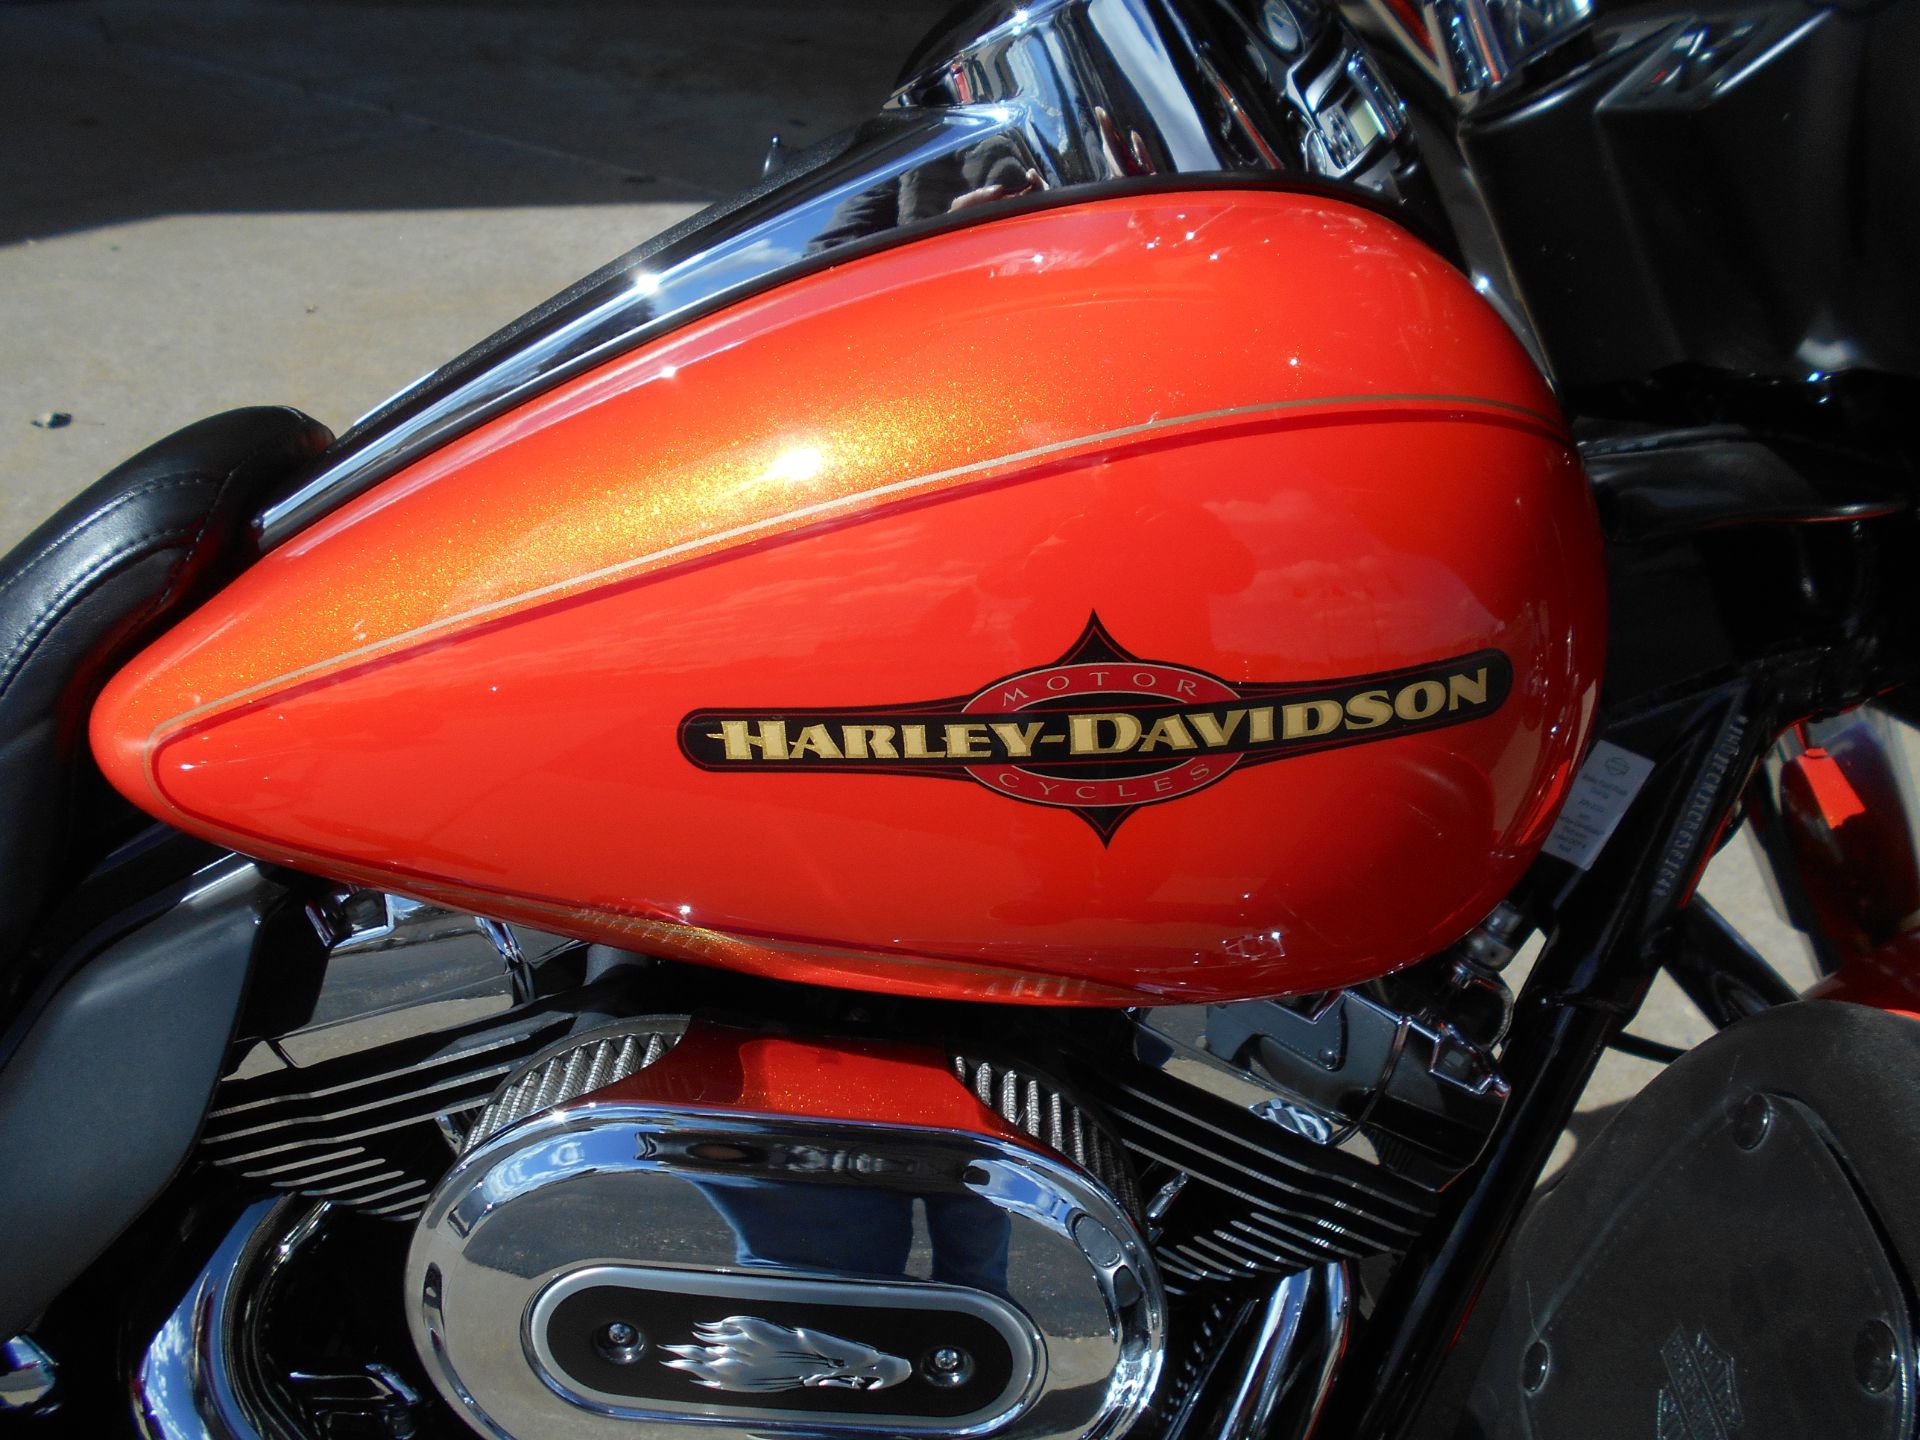 2012 Harley-Davidson Ultra Classic® Electra Glide® in Mauston, Wisconsin - Photo 2